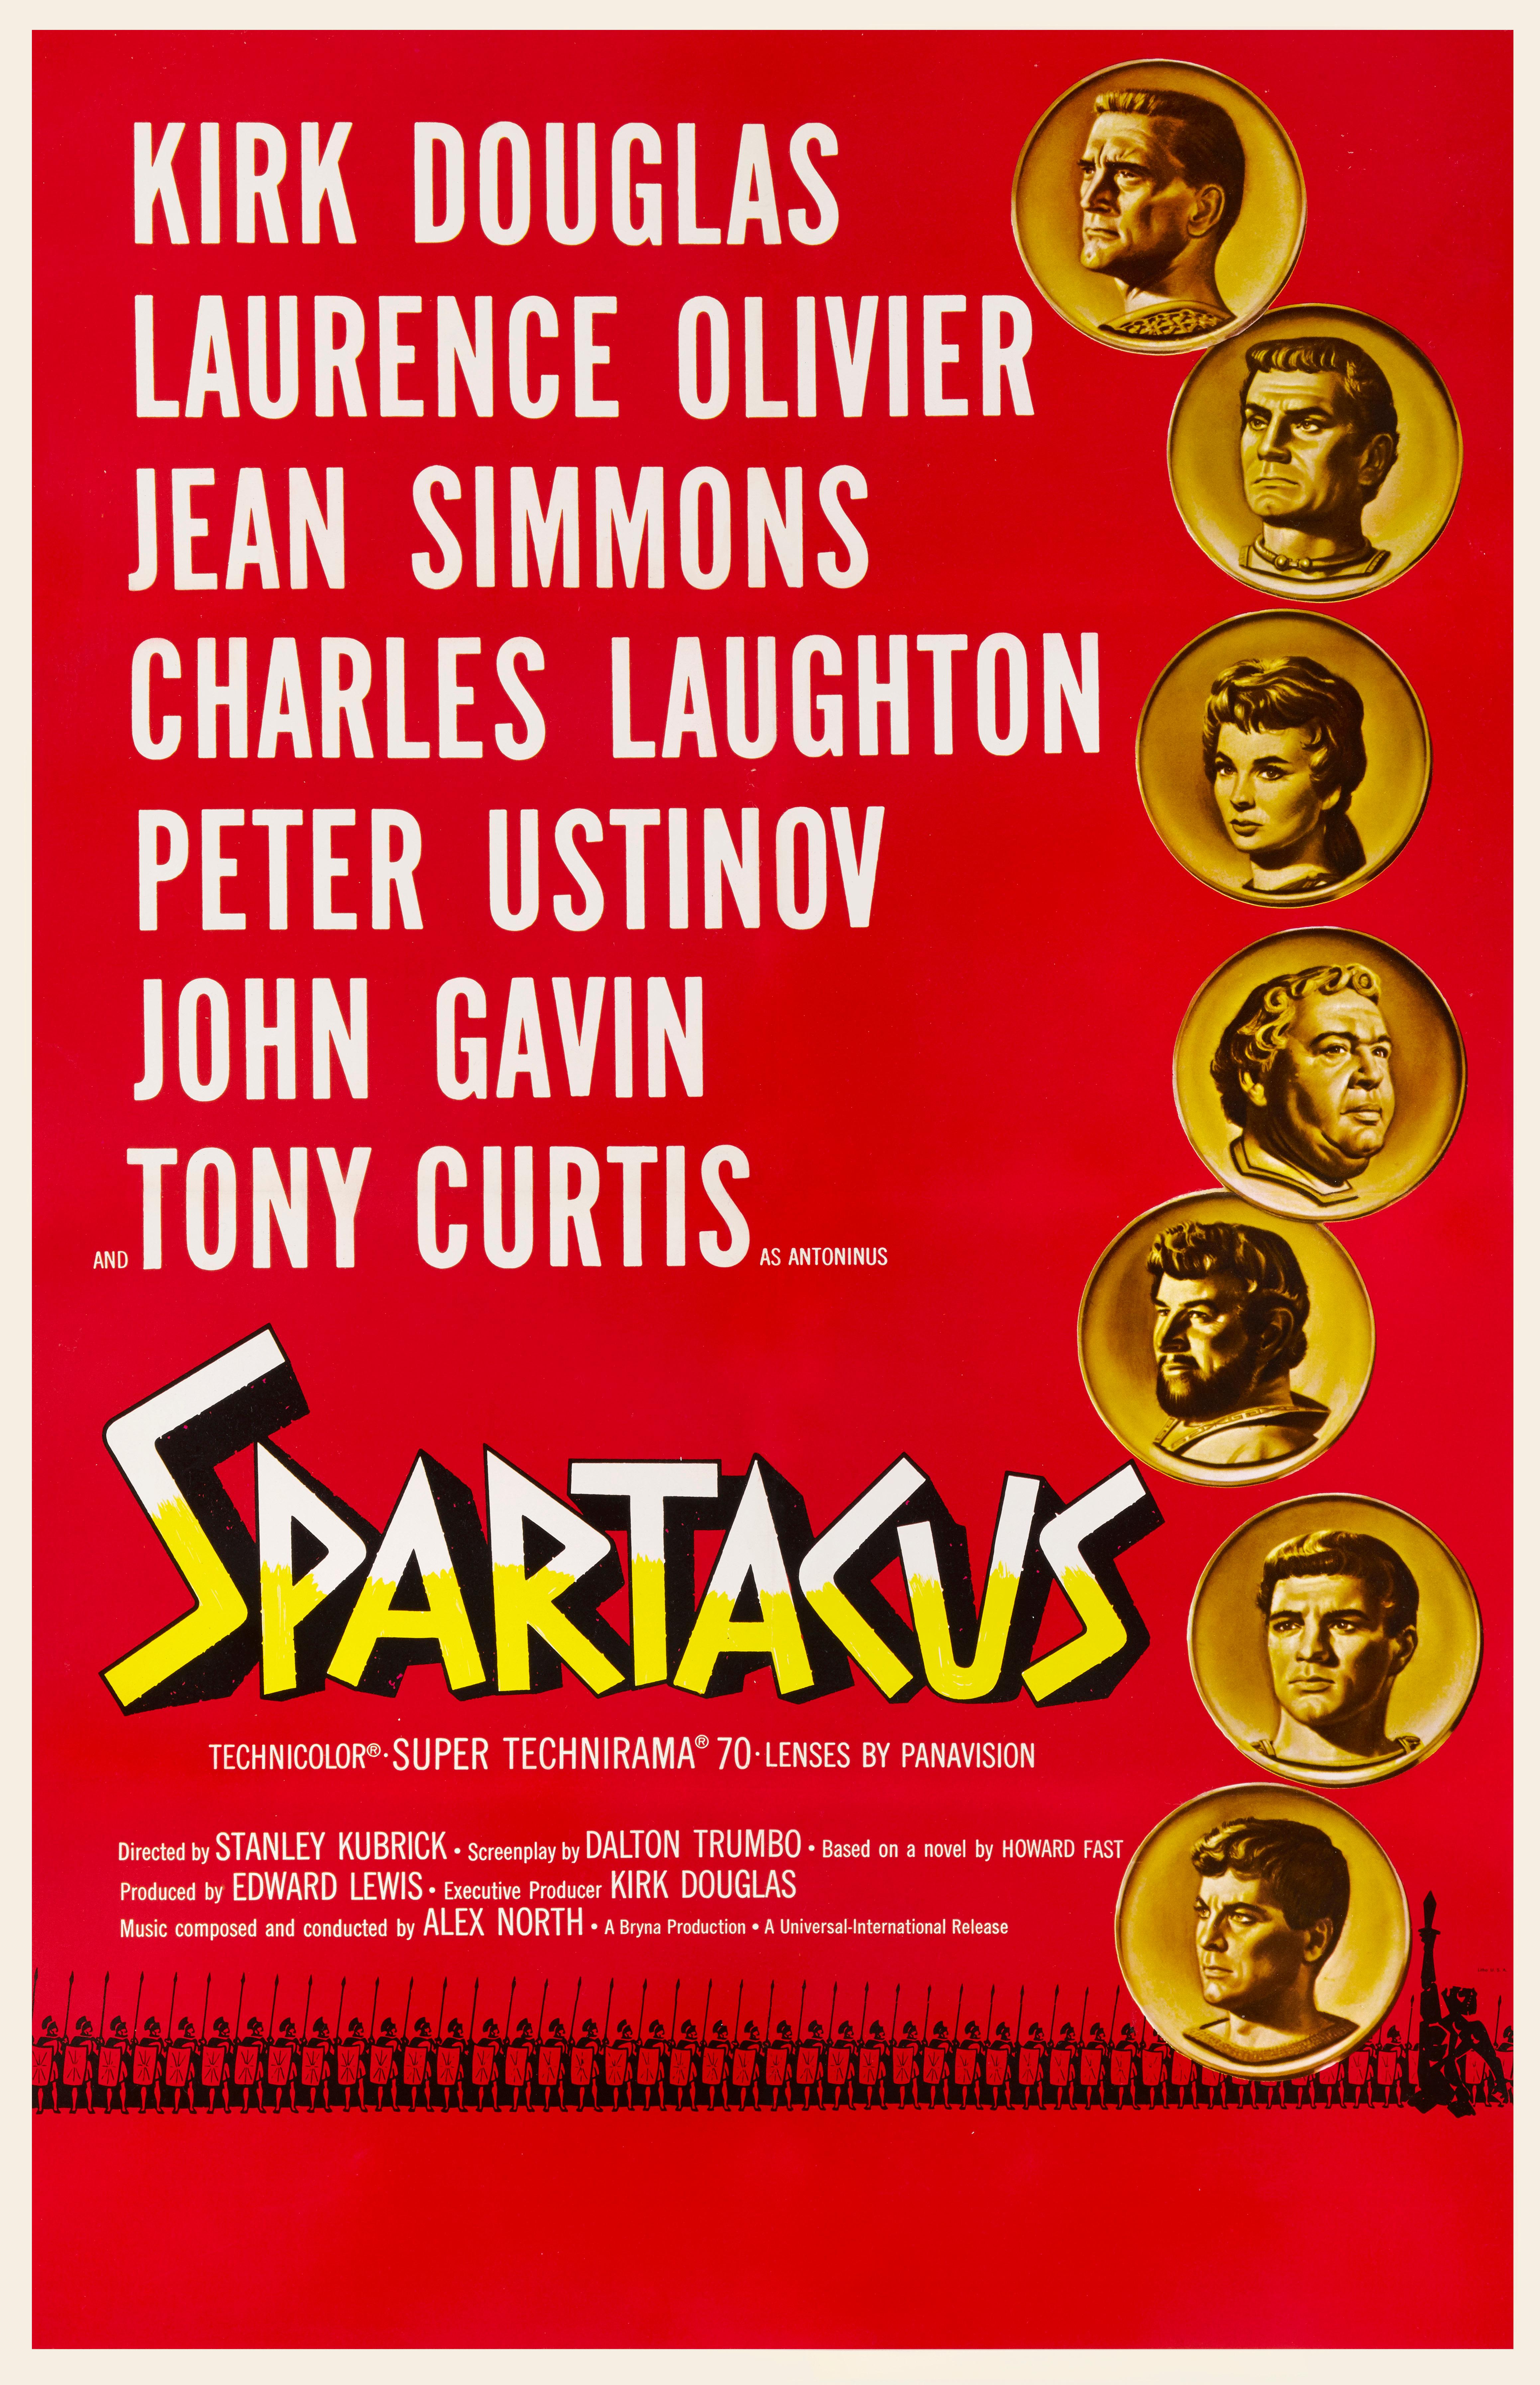 Original Road show style US film poster for “Spartacus” (1960).The film was directed by Stanley Kubrick and stared Kirk Douglas, Laurence Olivier, Charles Laughton, Tony Curtis, Jean Simmons, Peter Ustinov, John Gavin. This epic historical drama